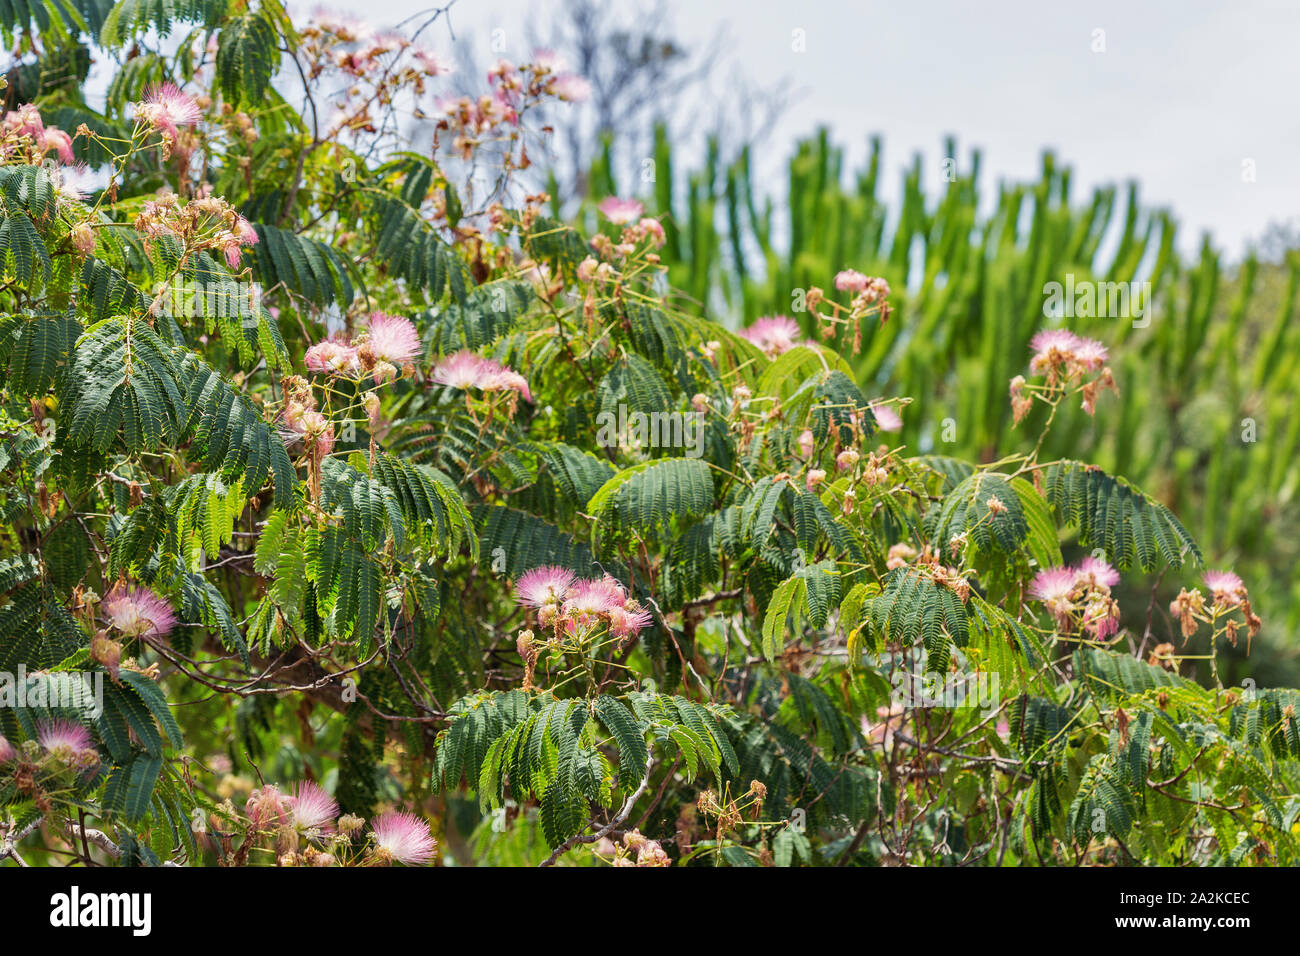 Blossoming Albizia julibrissin is known as Lenkoran acacia tree as well as Persian silk tree on Corsica island, France. Stock Photo